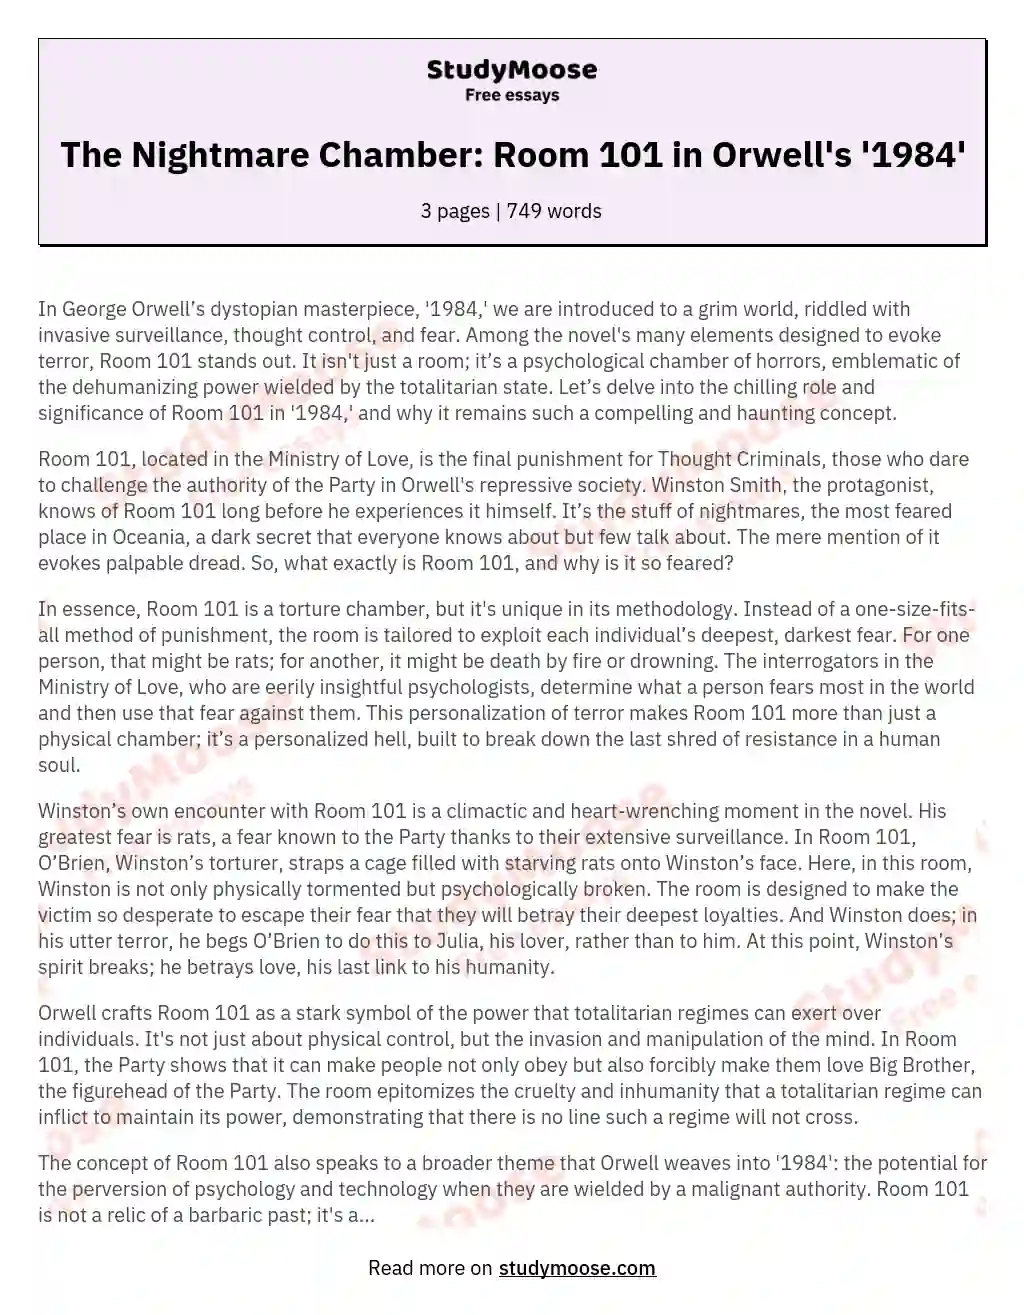 The Nightmare Chamber: Room 101 in Orwell's '1984' essay